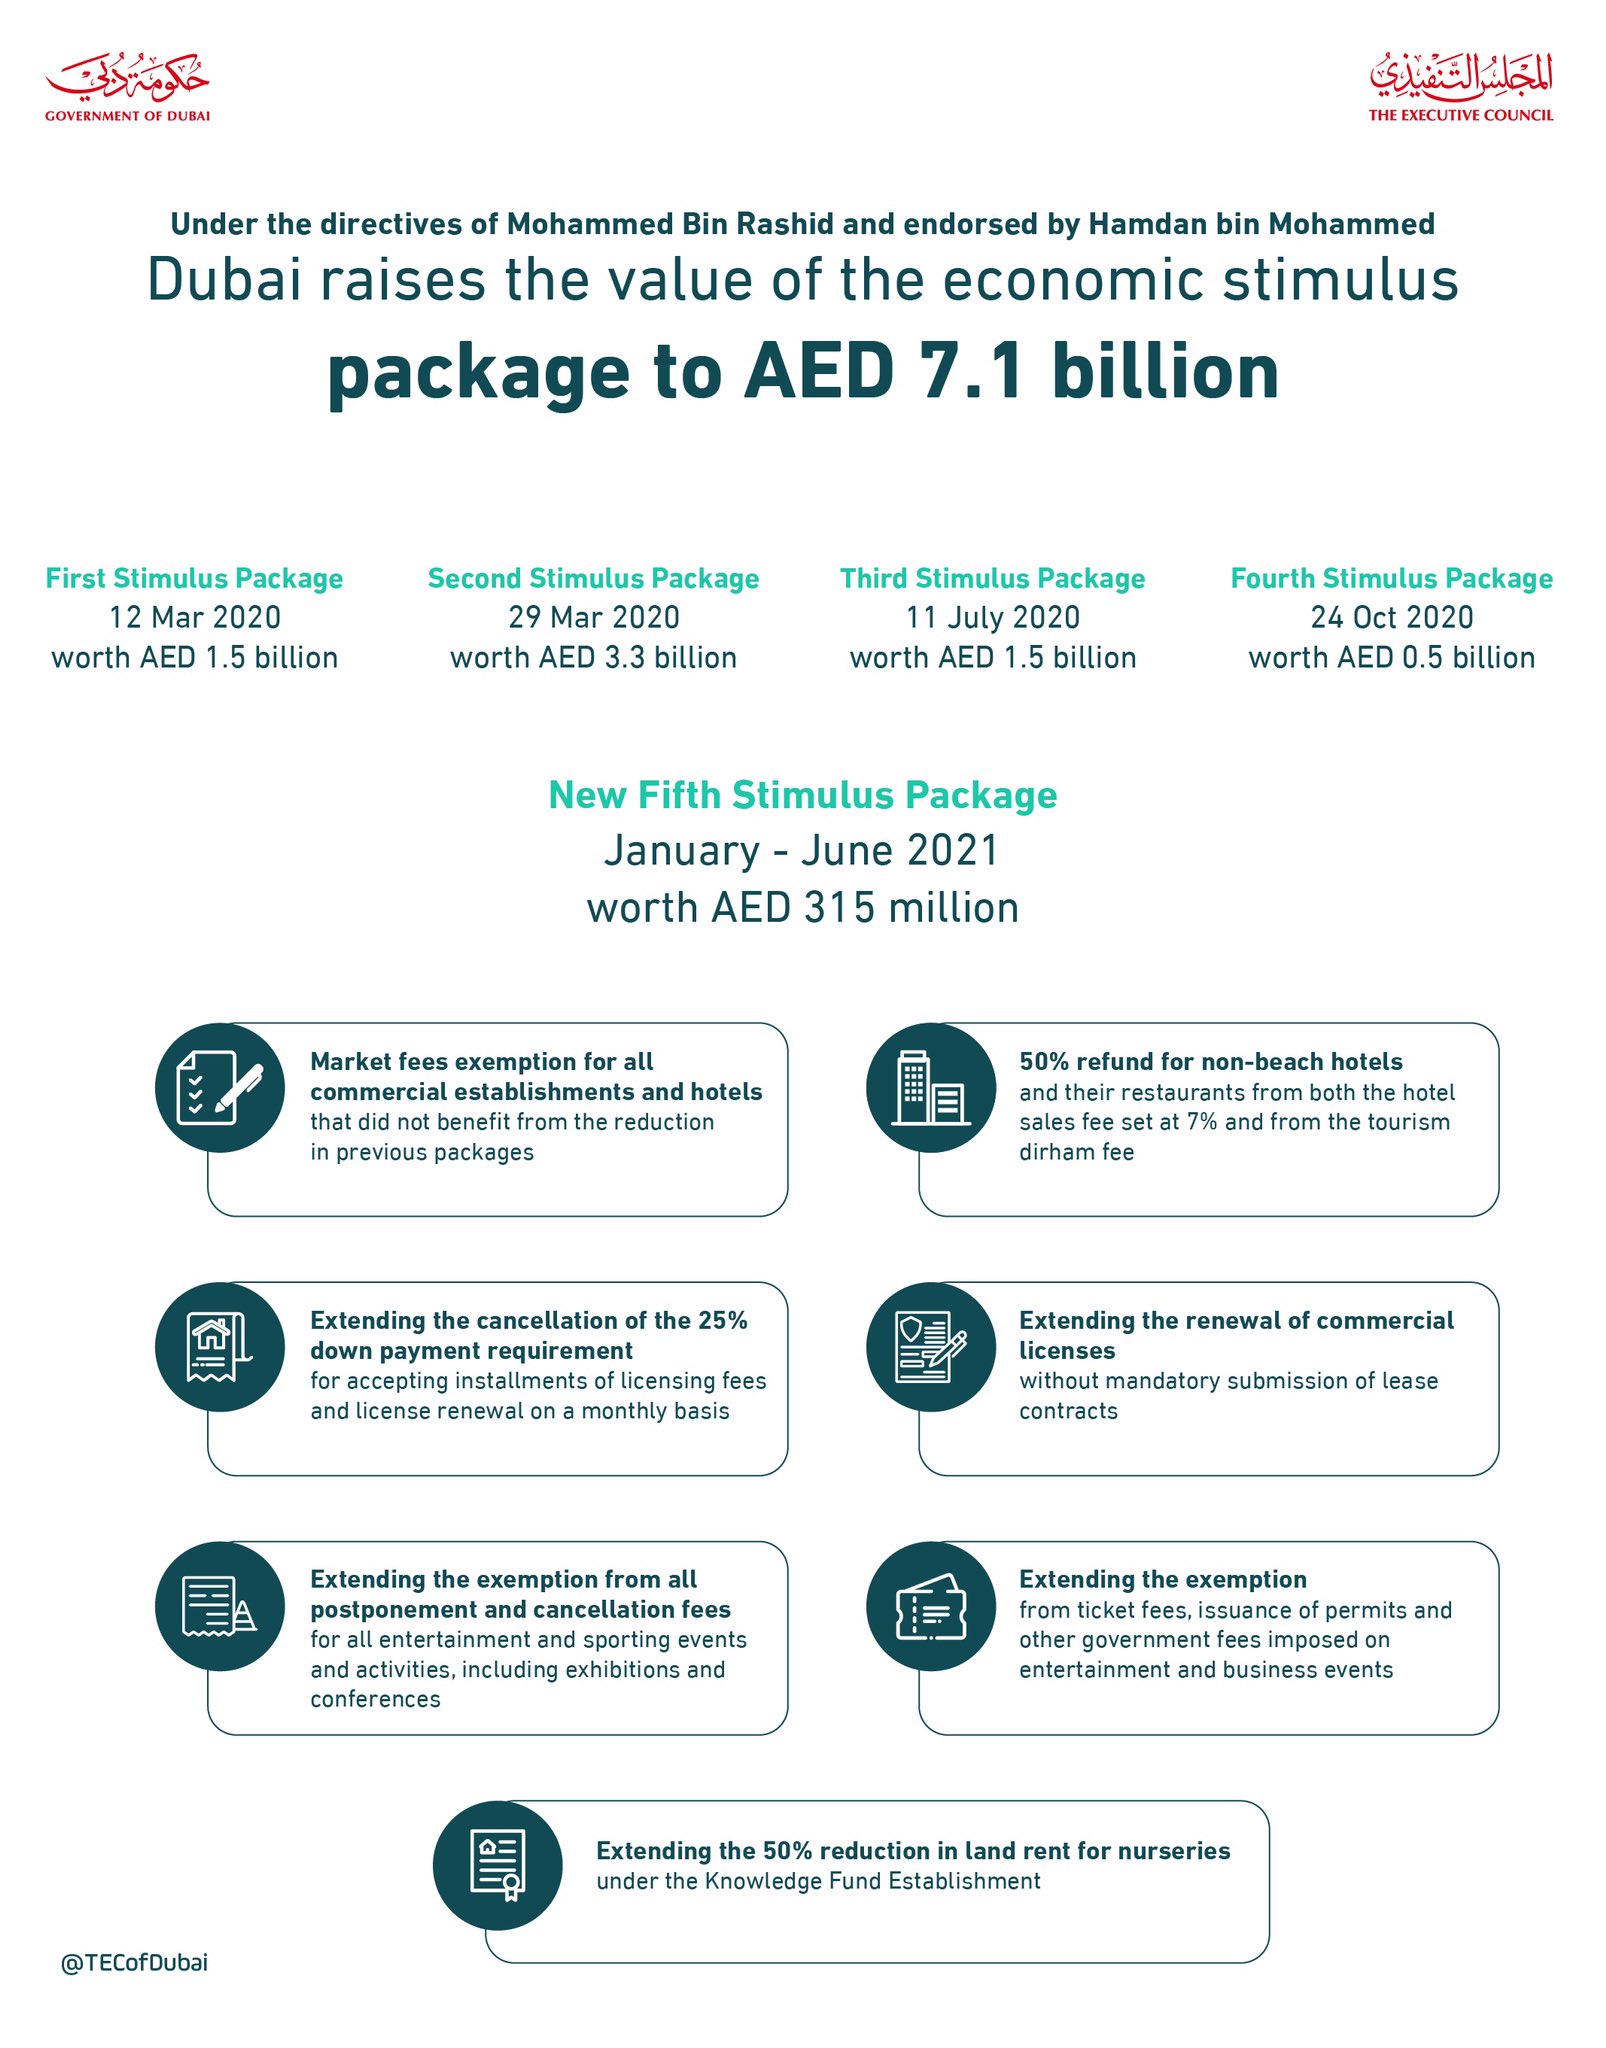 Increases of economic stimulus package to AED7.1 billion